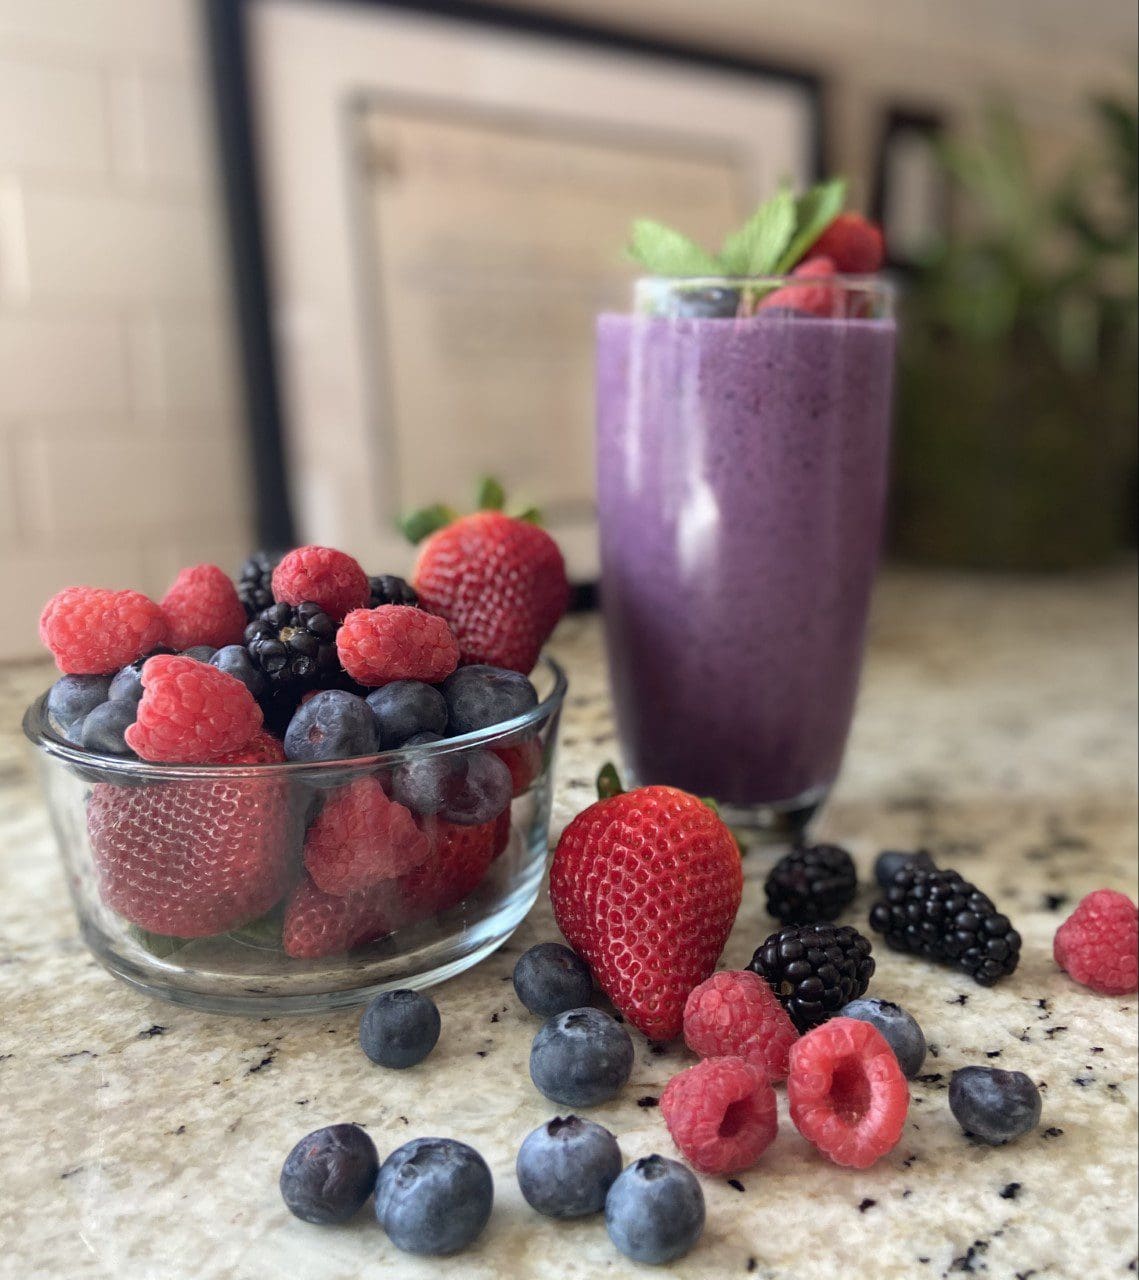 Featured image for “Breakfast Smoothie”